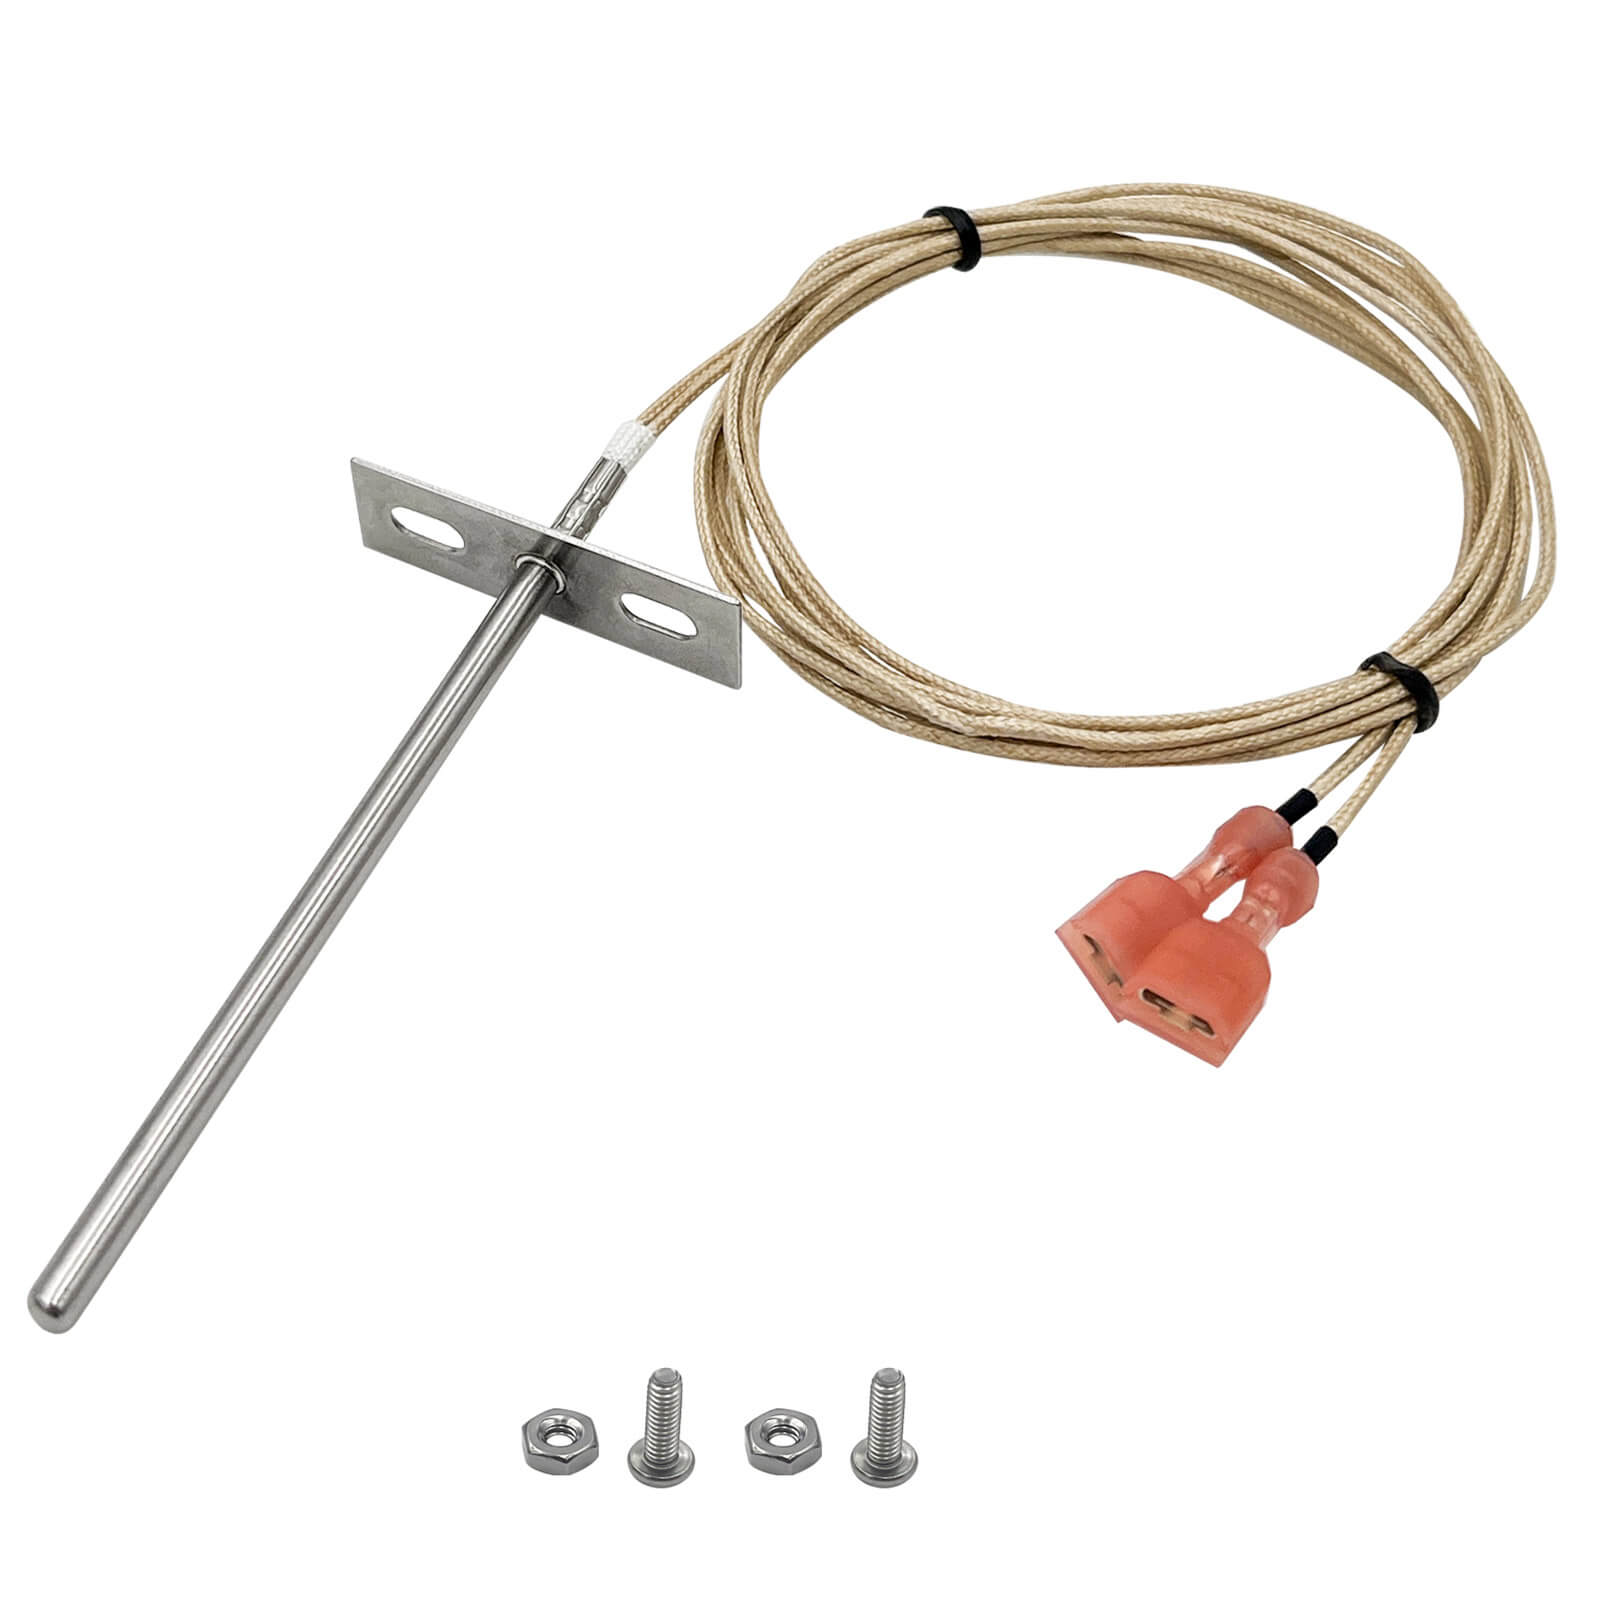 4'' Small RTD Temperature Probe for Rec Tec RT-340 & RT-300 Grill -YAOAWE